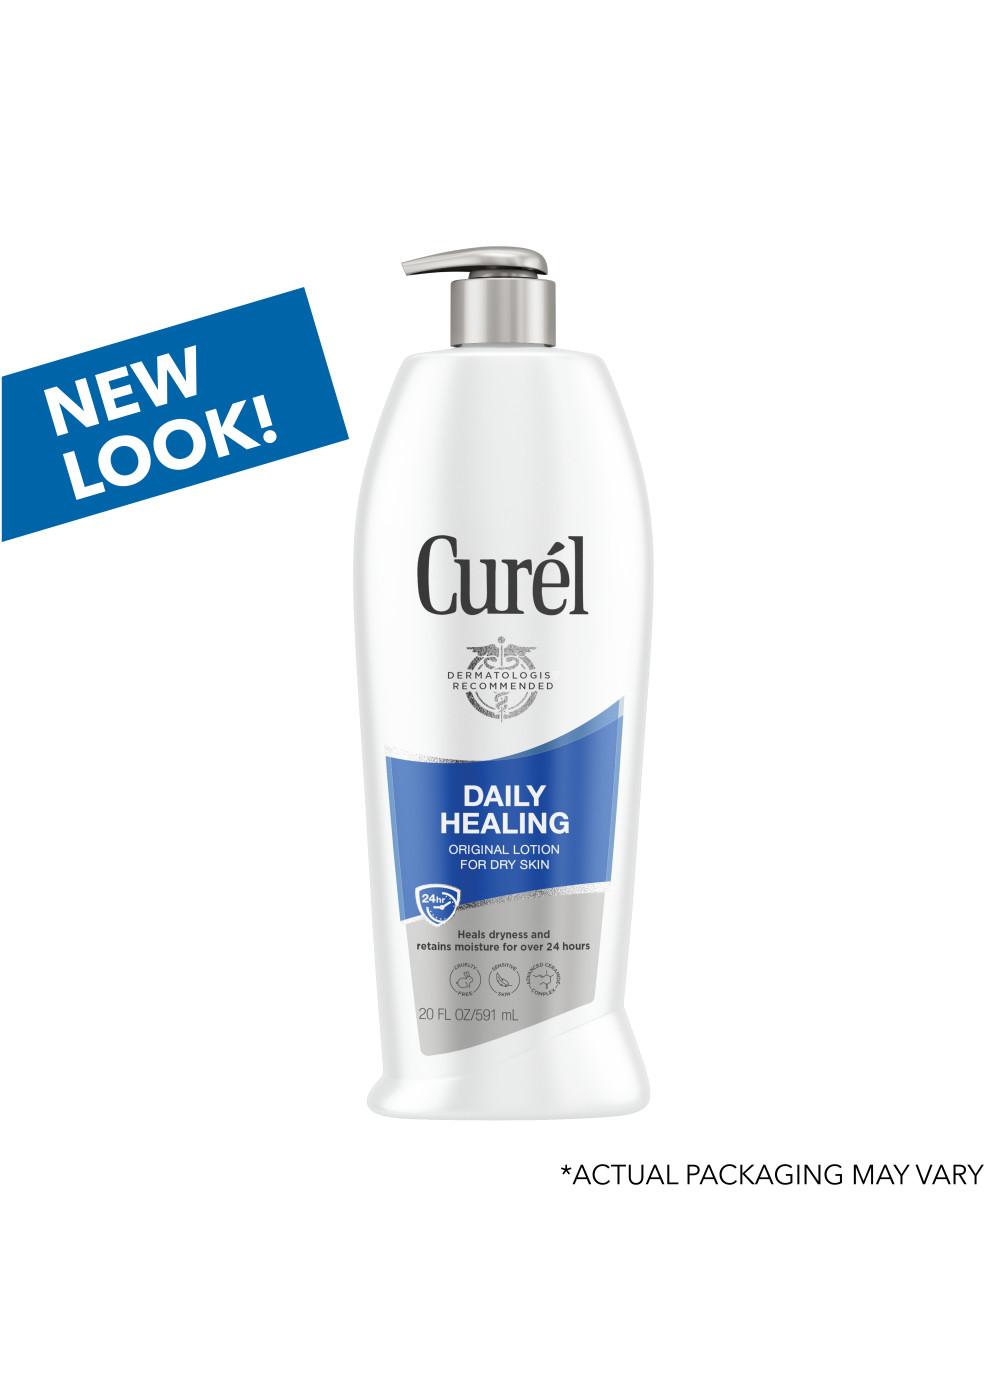 Curel Daily Healing Body Lotion; image 10 of 10